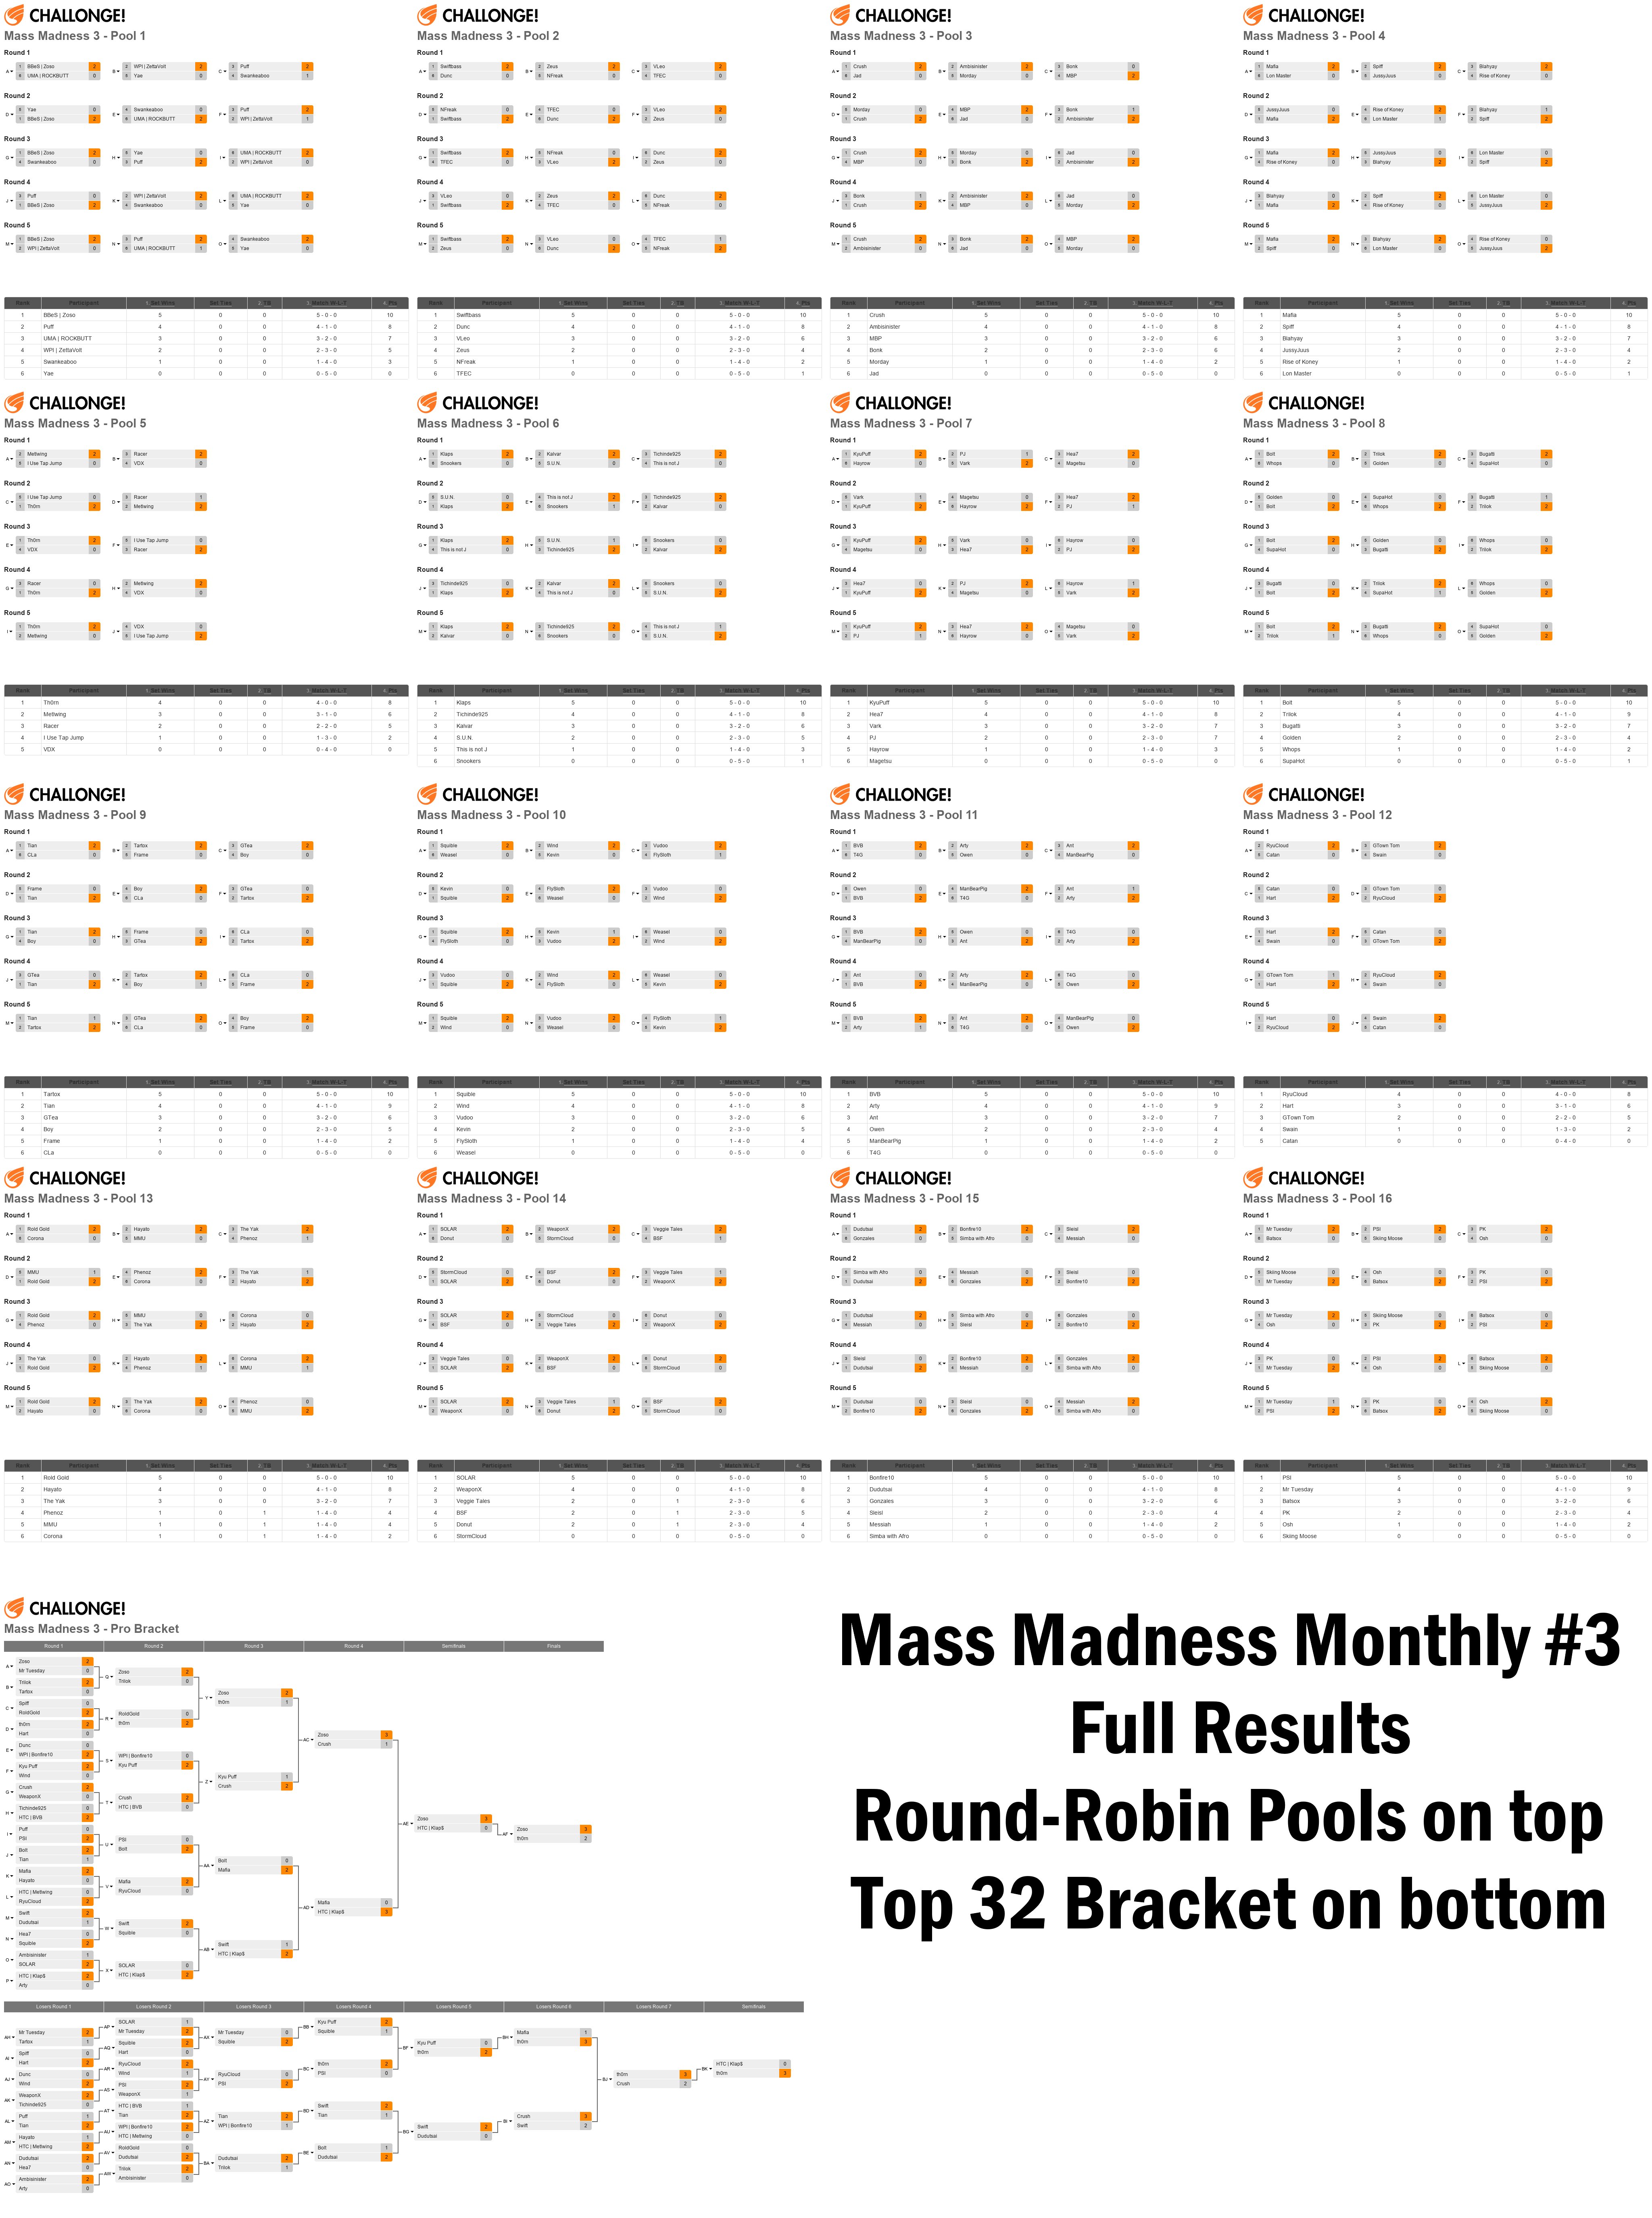 Mass Madness Monthly #3: Melee Singles